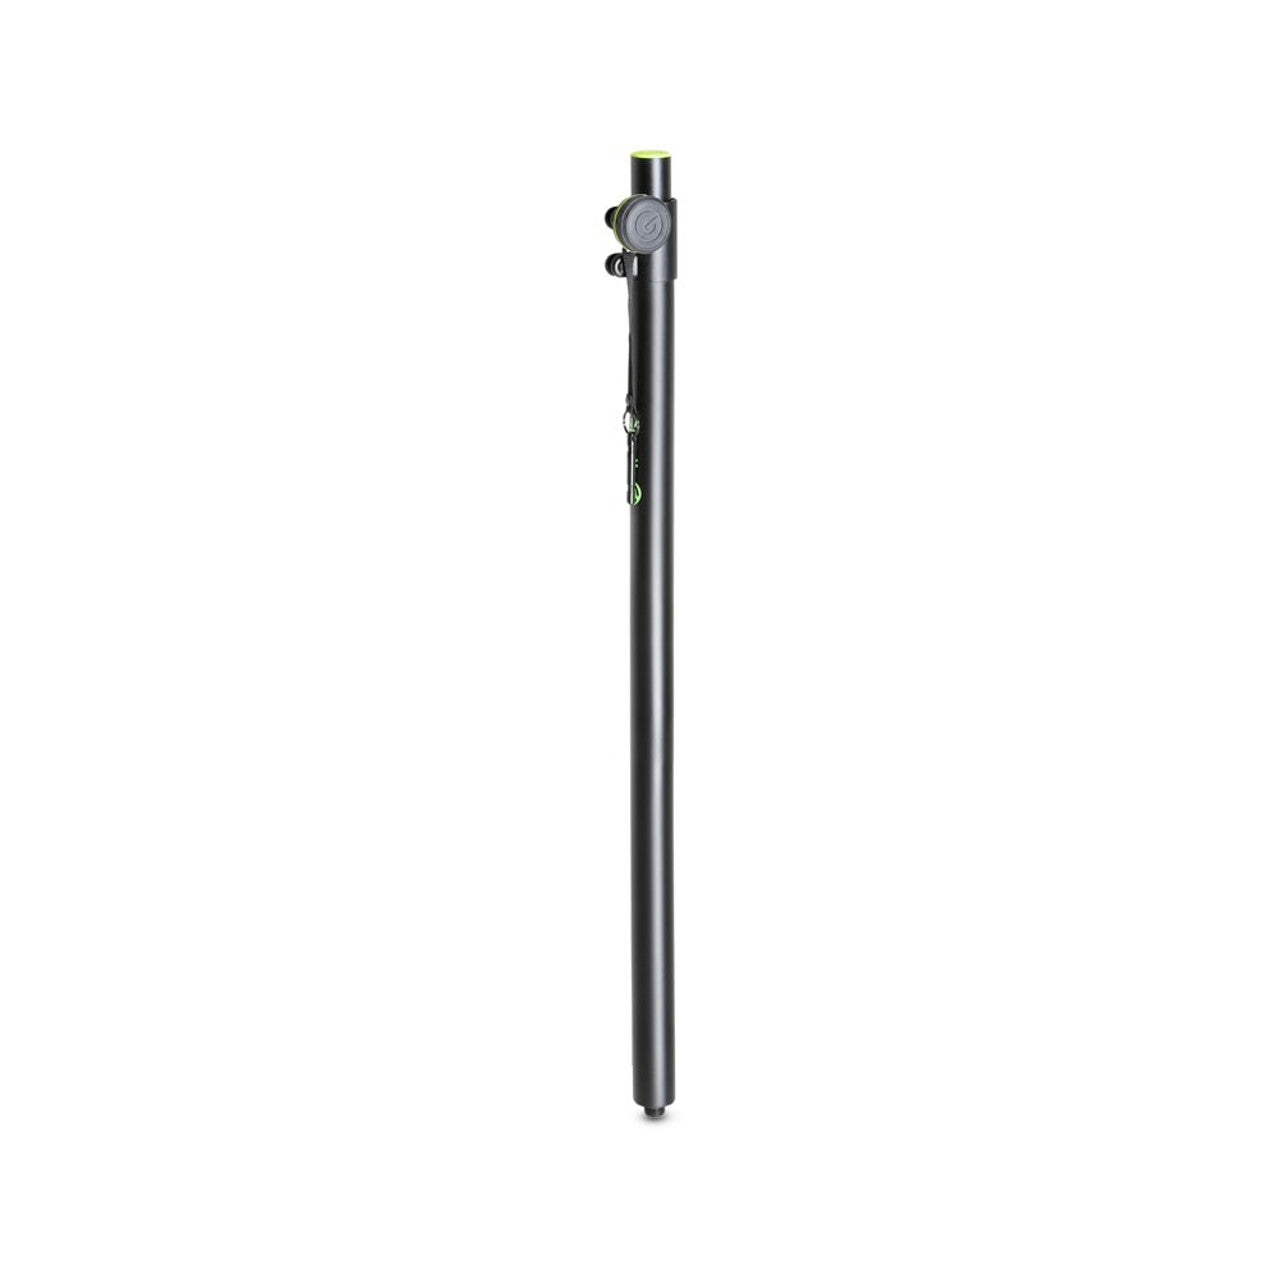 GRAVITY Adjustable Speaker Pole 35 mm to M20. Height from 32" to 56"